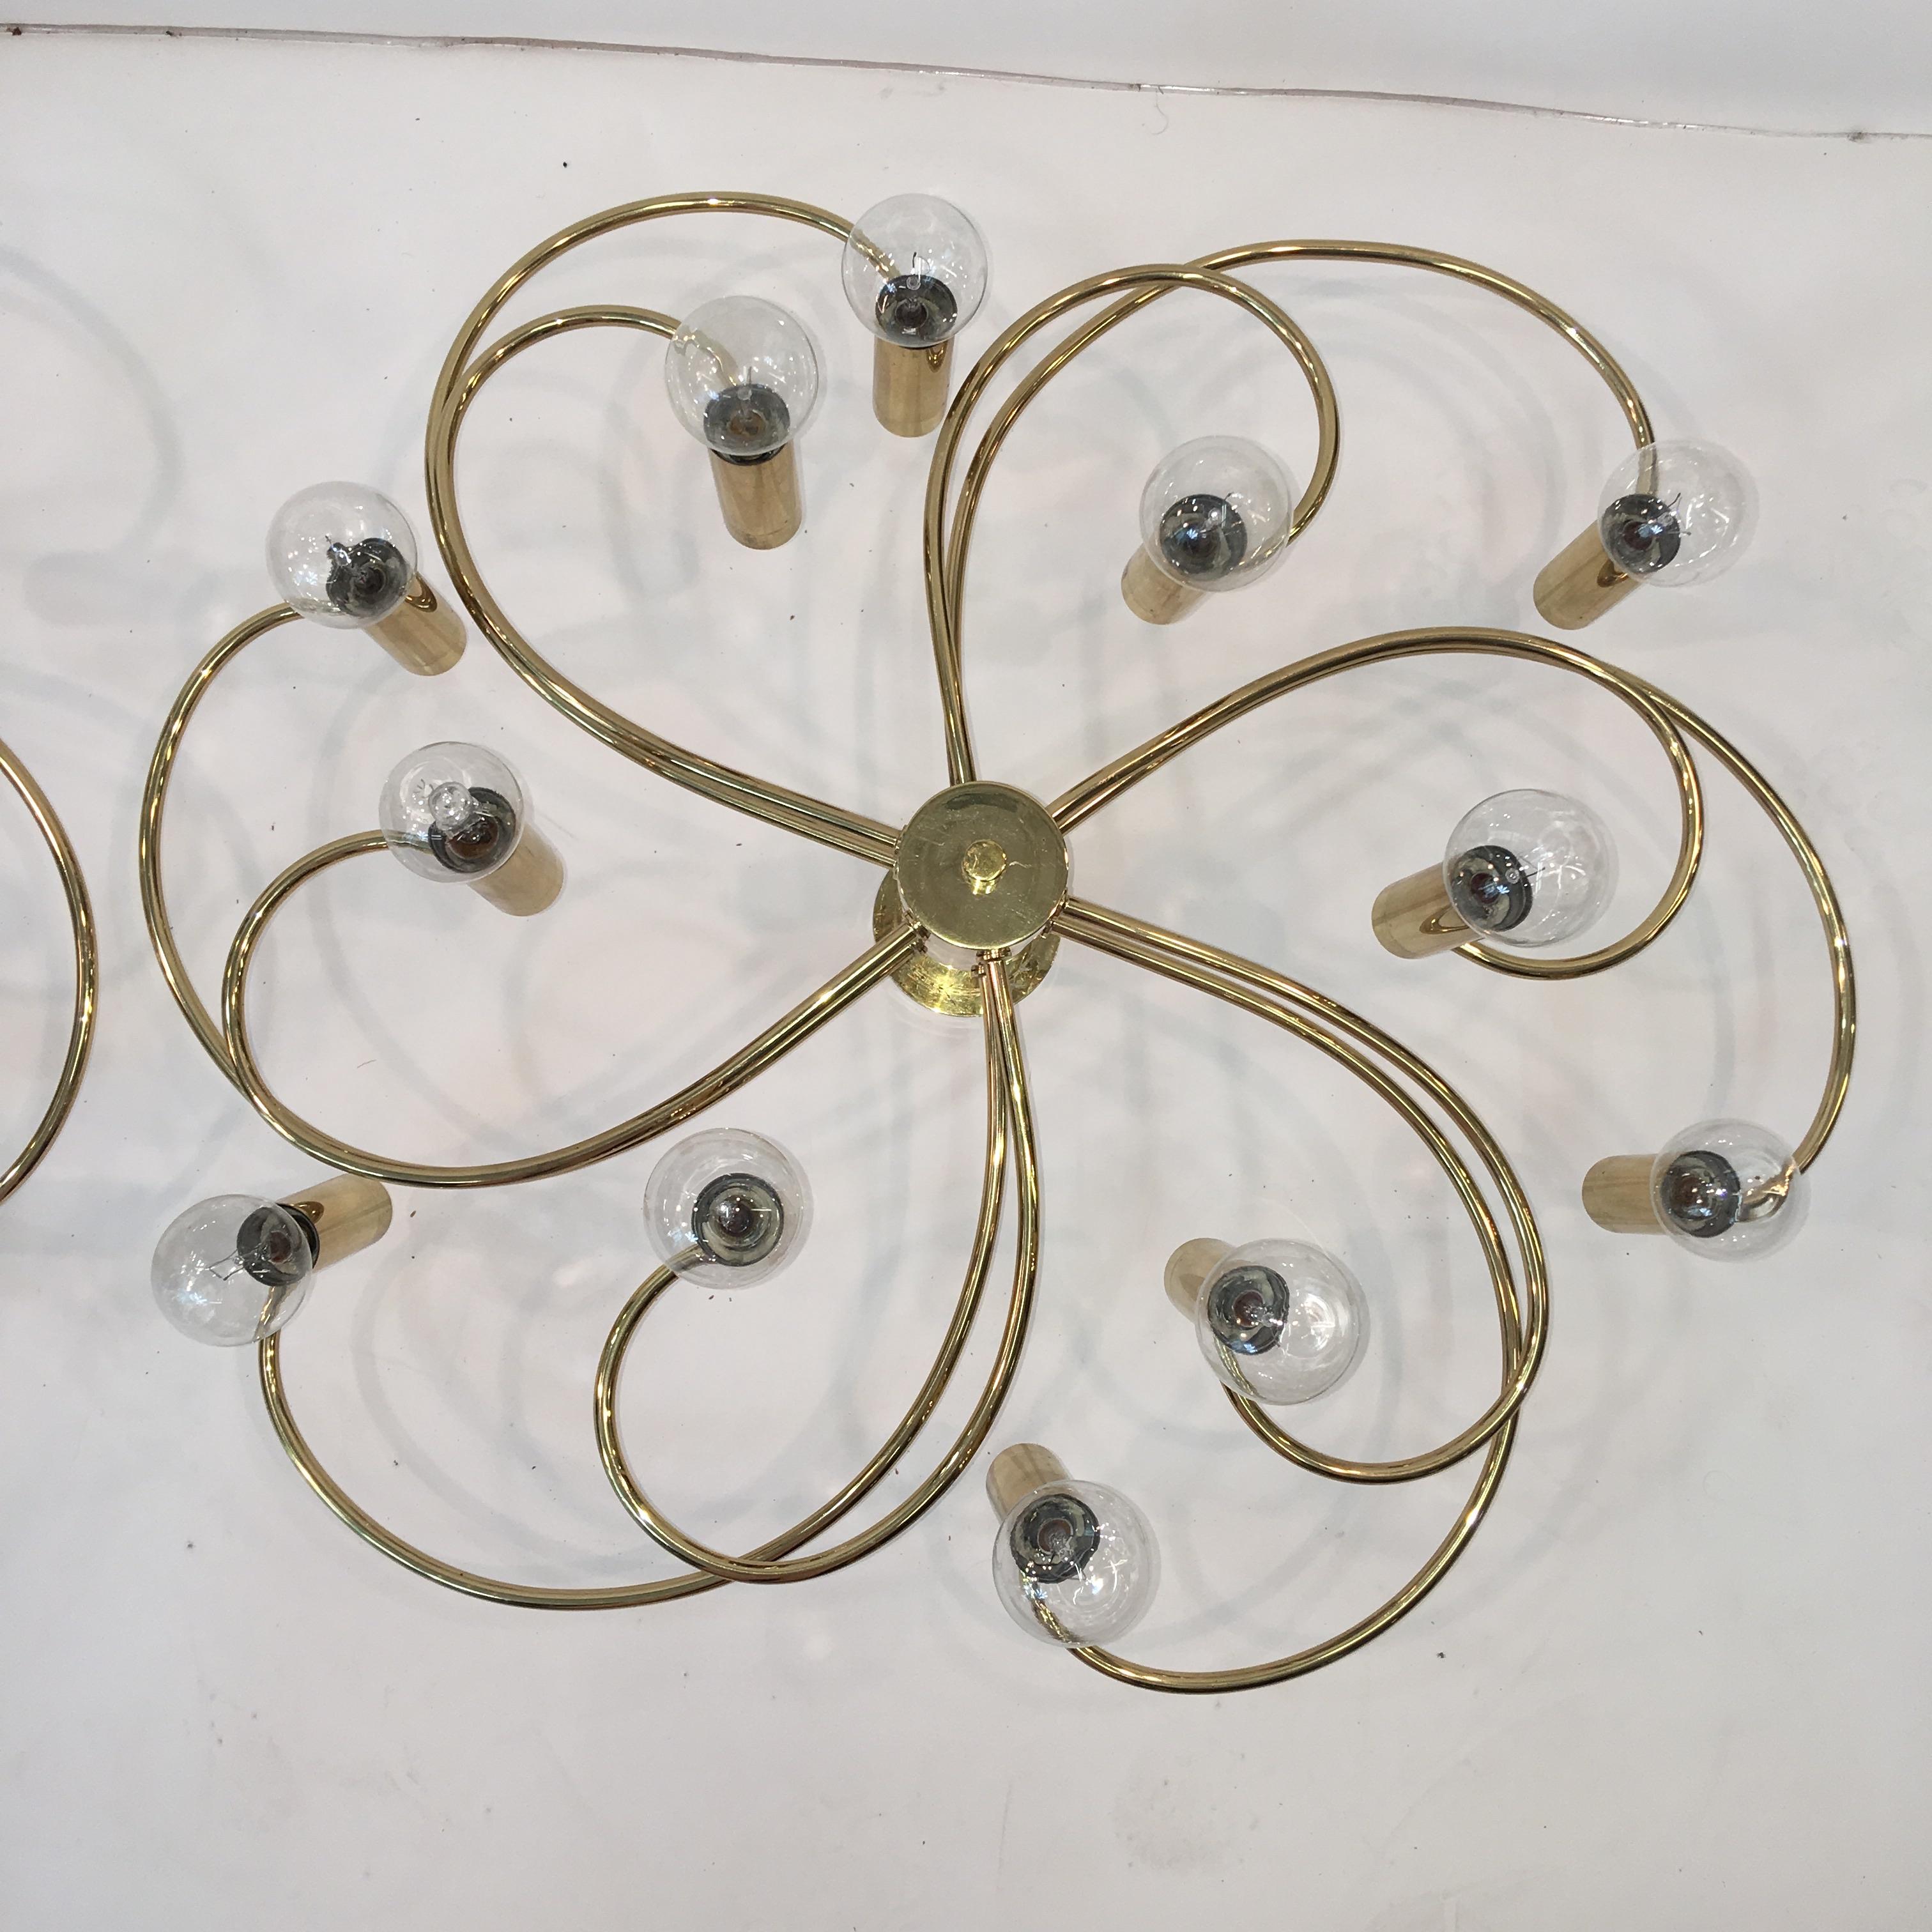 Pair of vintage 1960s pinwheel form brass ceiling or wall mounted light fixtures. Produced by Cosack Leuchten and designed by Hans Wilfried Hegger (sometimes H. W. Egger).  
Each socket takes a single candelabra size screw cap bulb (E14 or E12) up